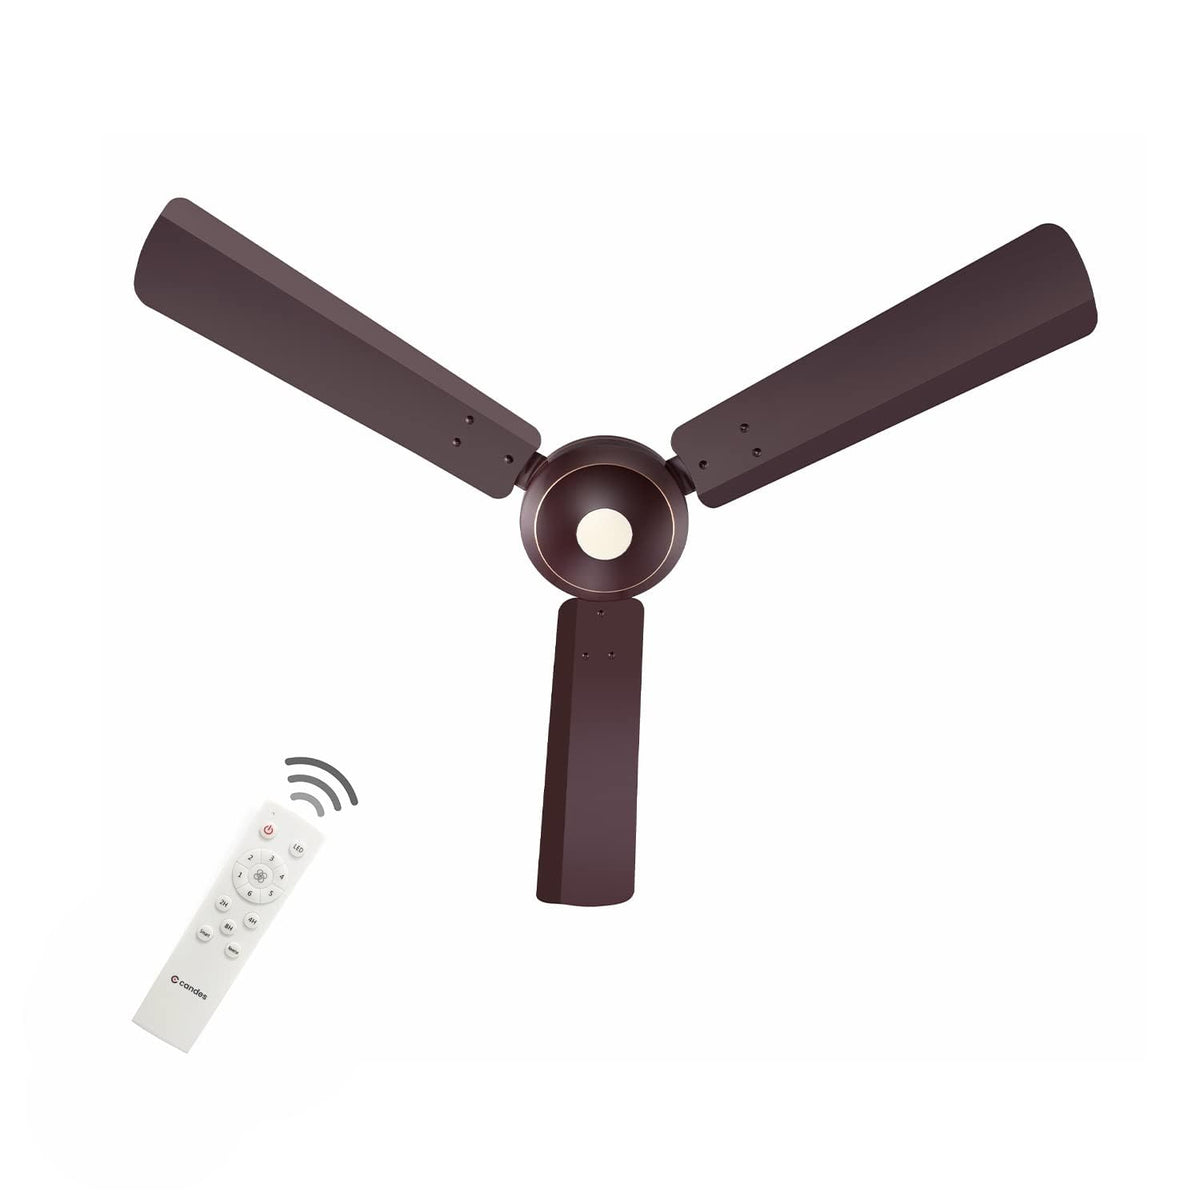 Candes Acura BLDC Ceiling Fan 1200mm / 48 inch | BEE 5 Star Rated, Upto 65% Energy Saving, High Air Delivery & High Speed Ceiling Fans for Home | 2+1 Years Warranty | Brown